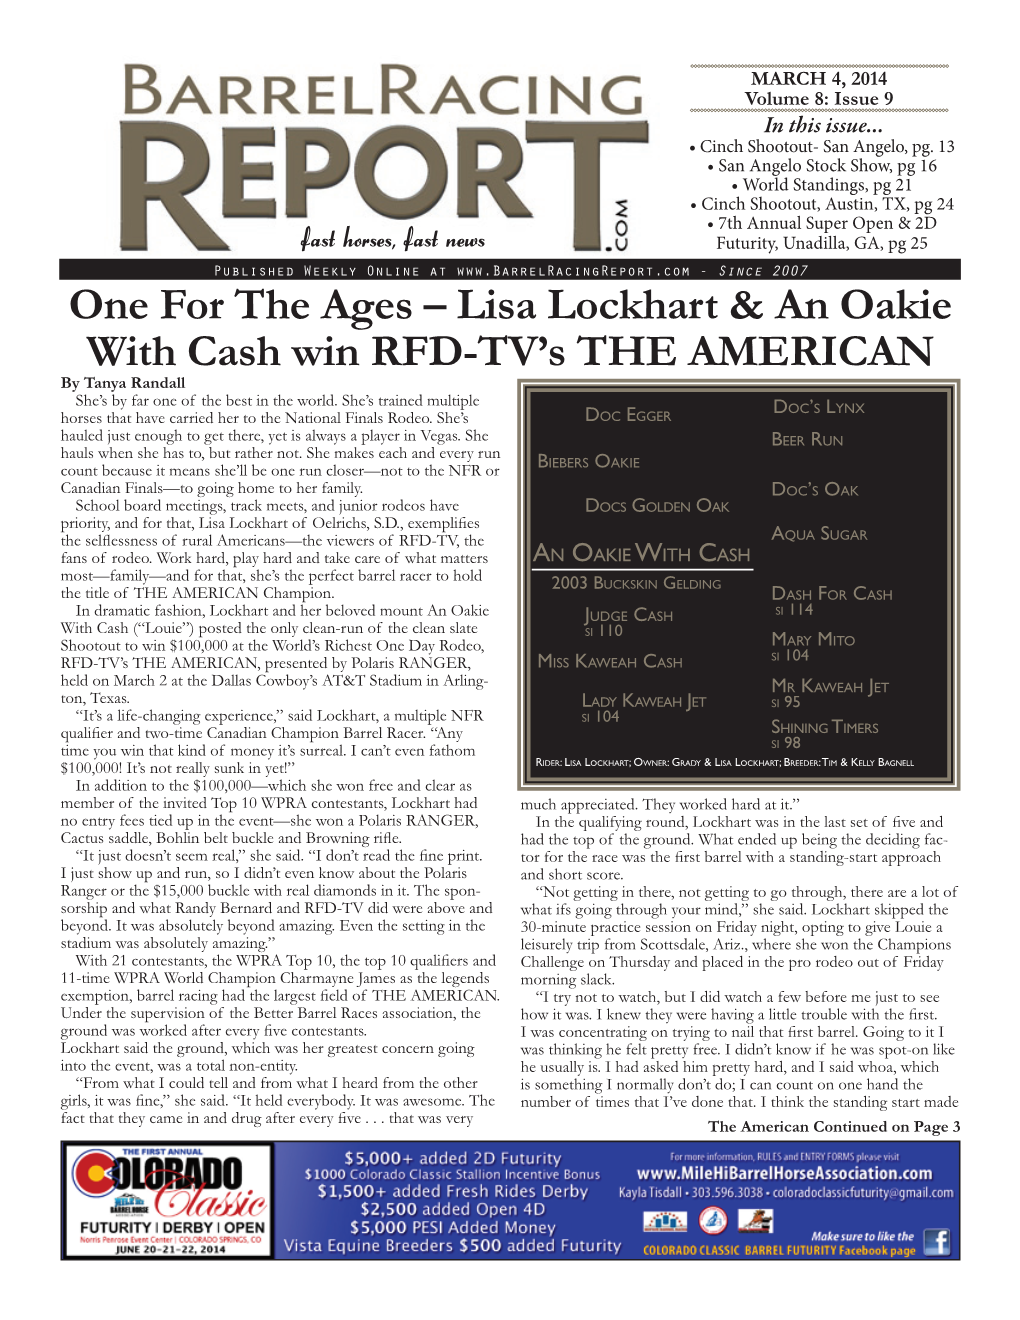 Lisa Lockhart & an Oakie with Cash Win Rfd-TV's the American